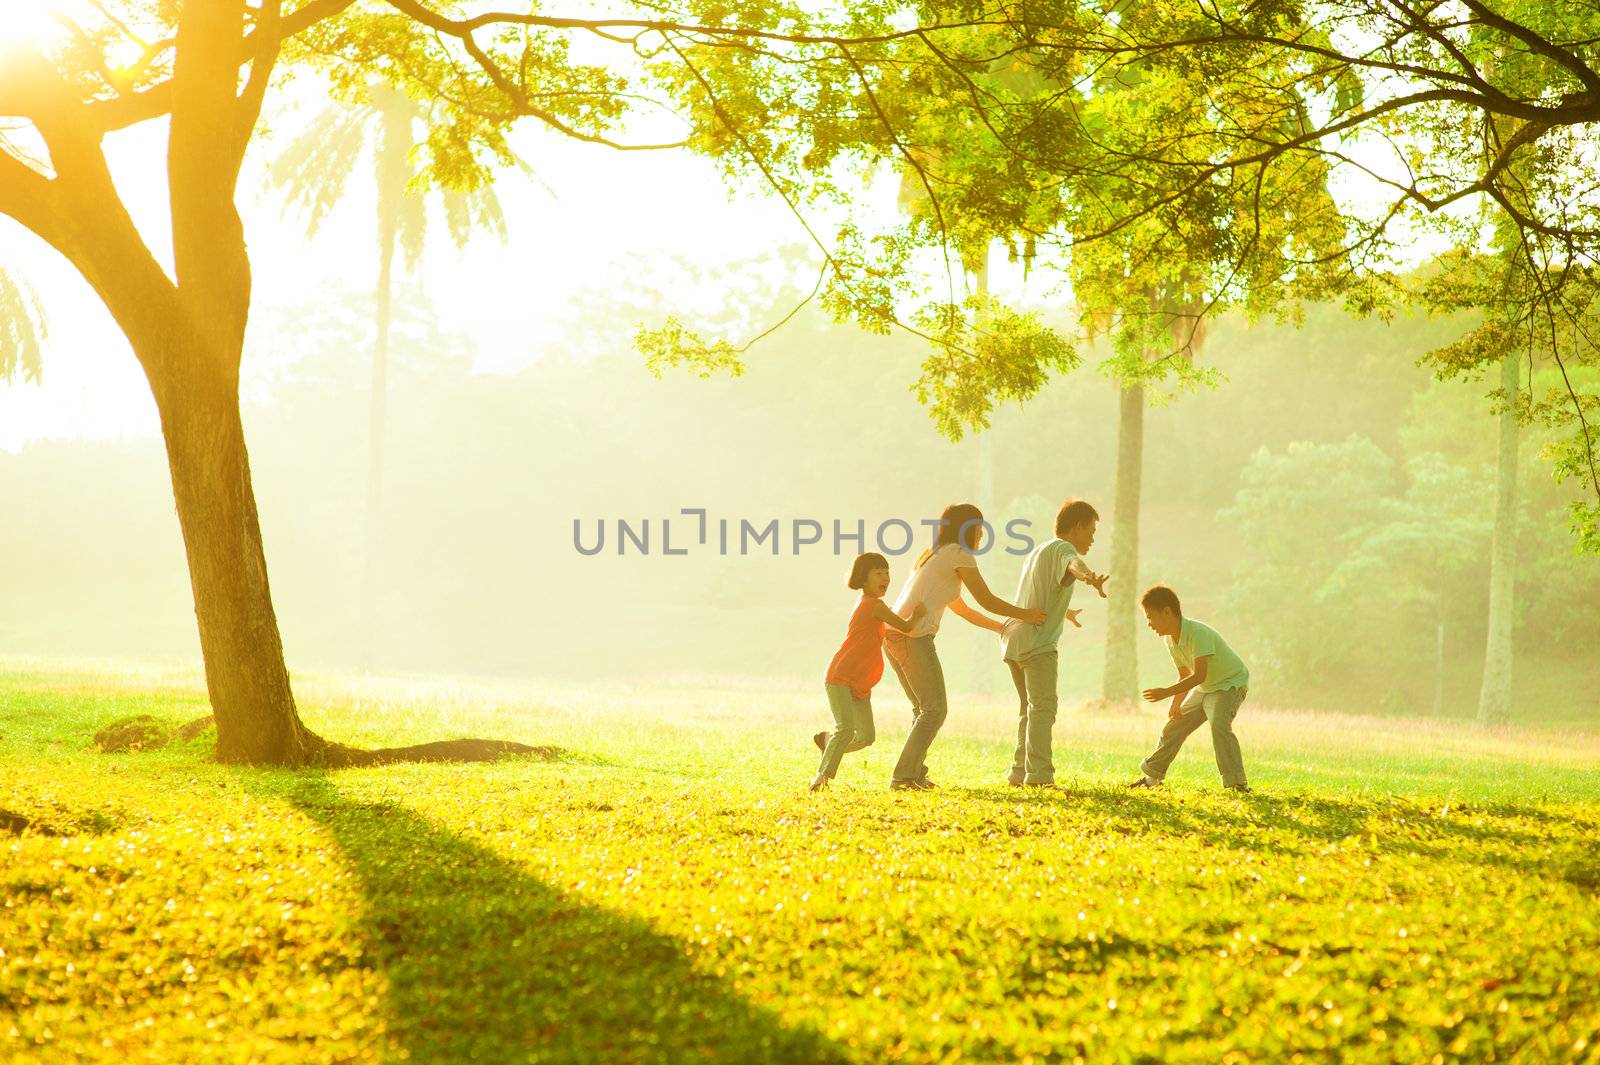 Asian family outdoor quality time enjoyment, asian people playing during beautiful sunrise